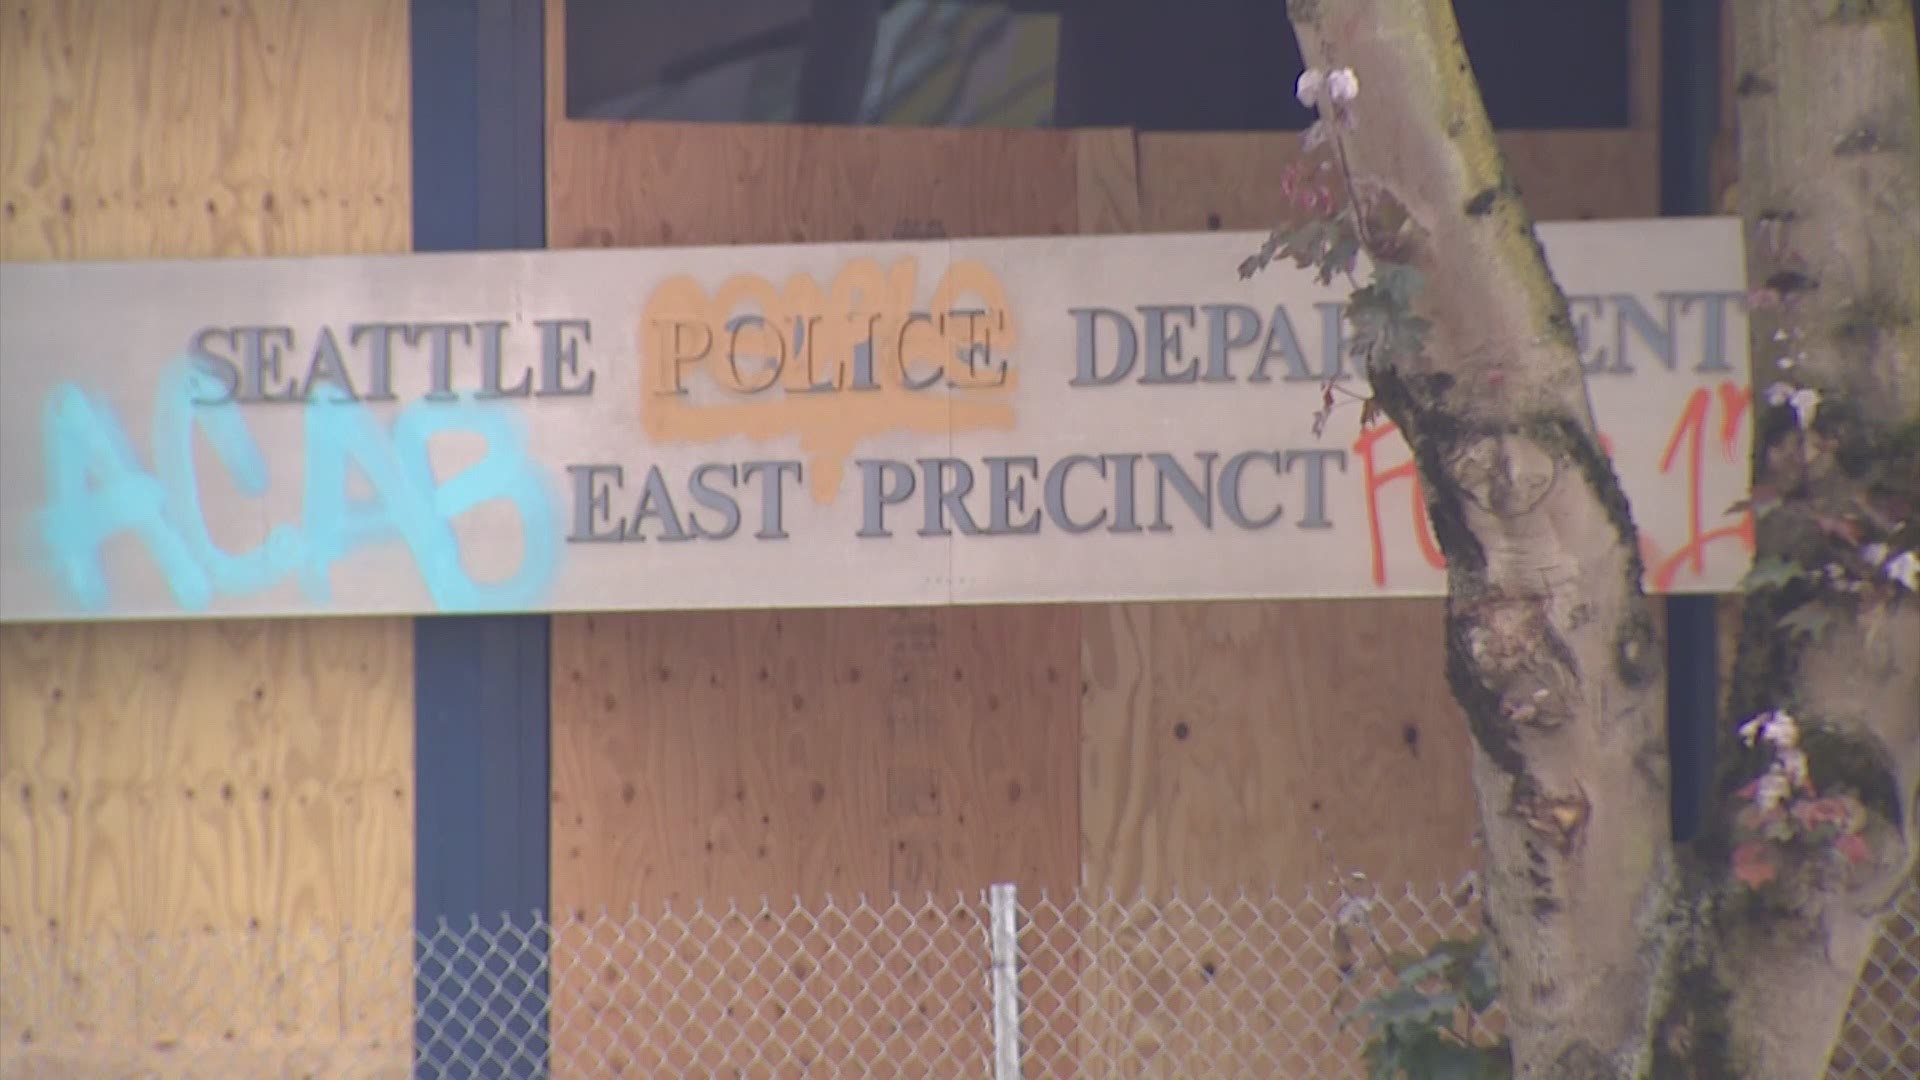 It's been a year since Seattle police abandoned the East Precinct in the Capitol Hill neighborhood.